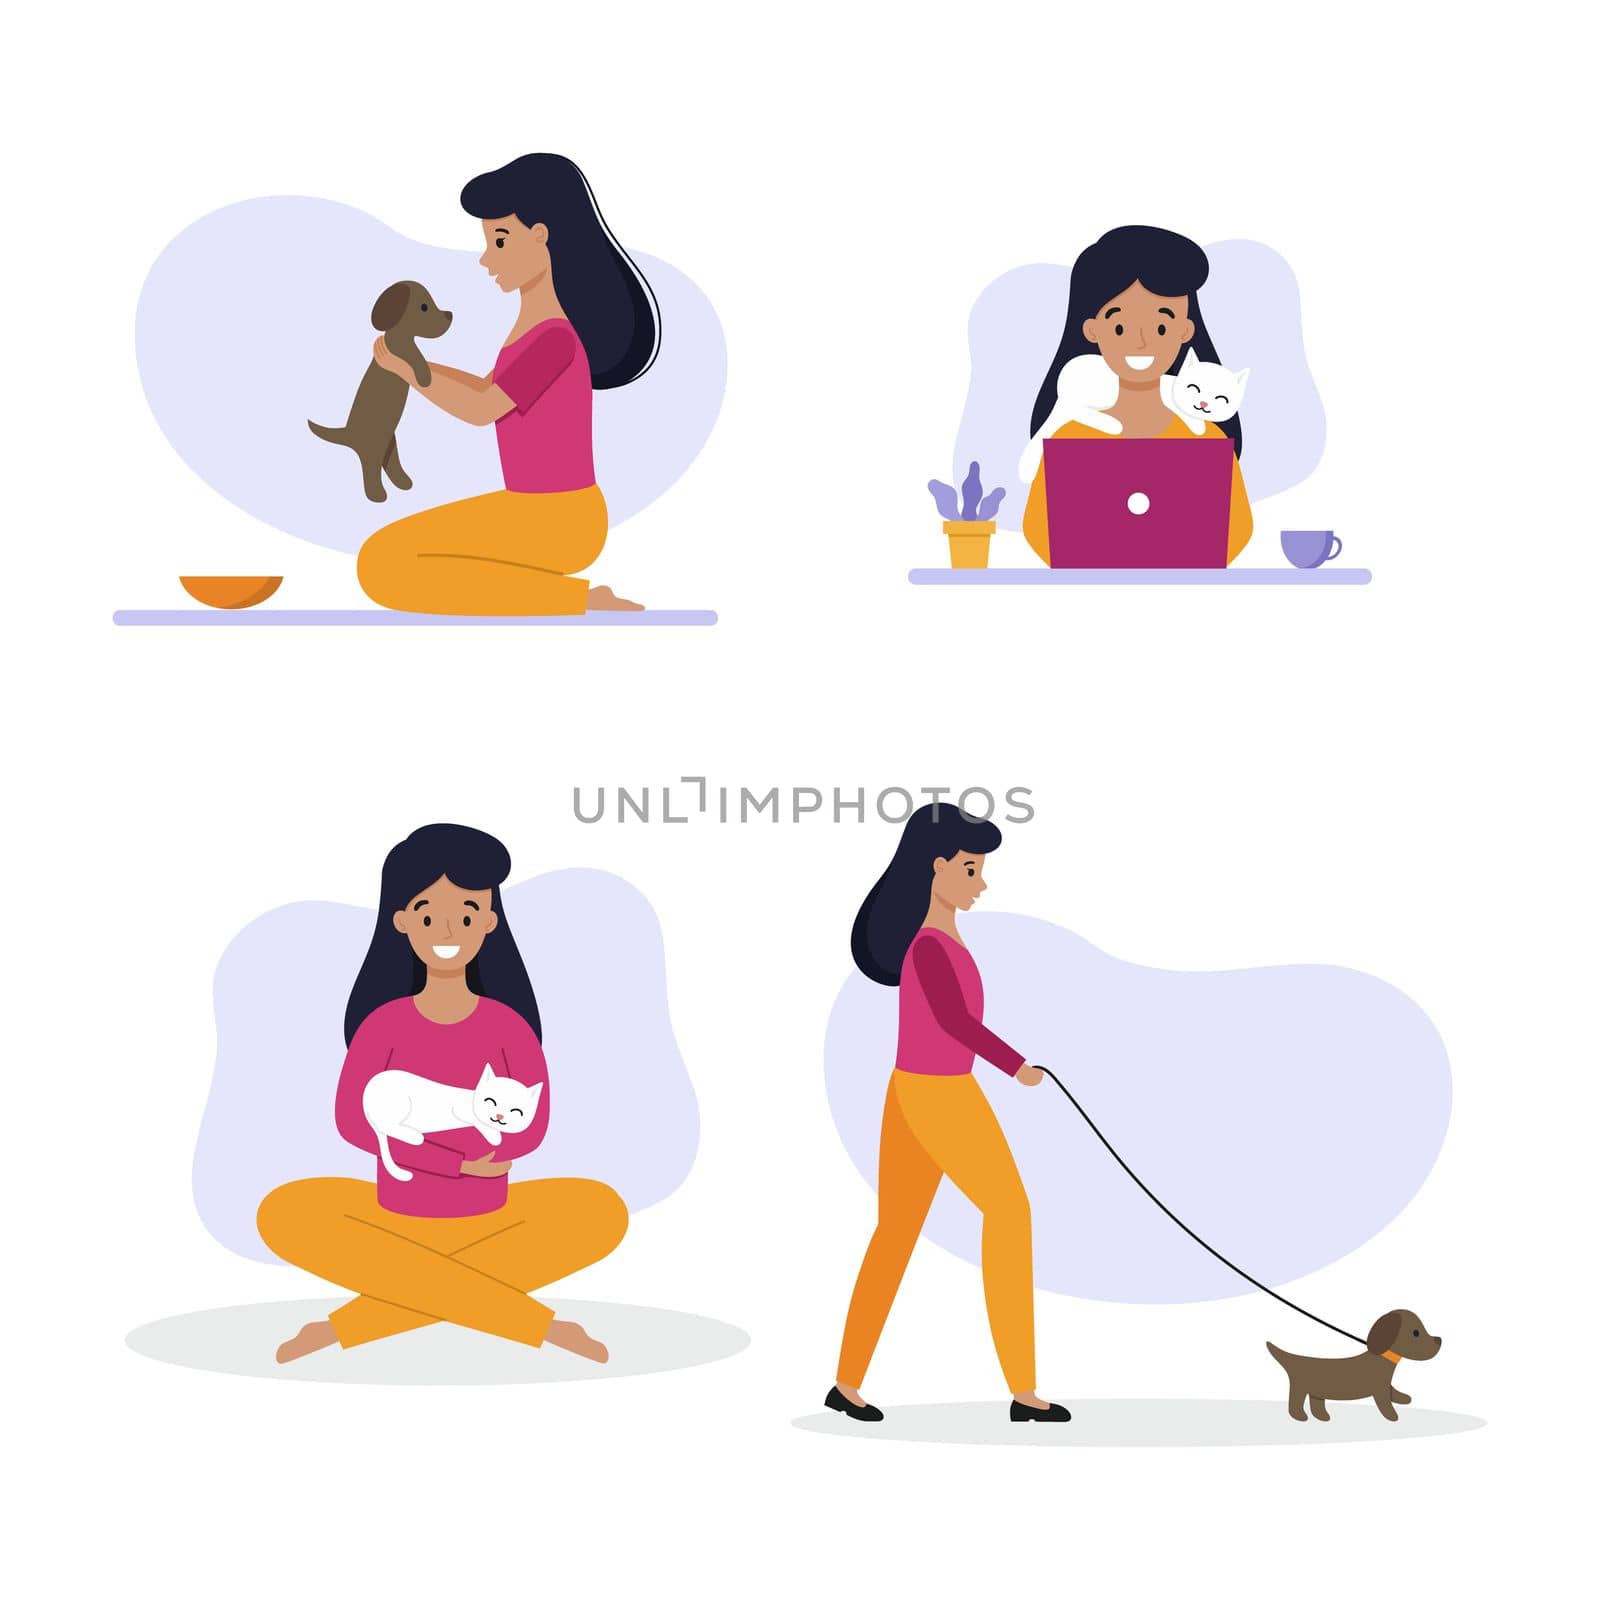 The girl spends time with her pet.